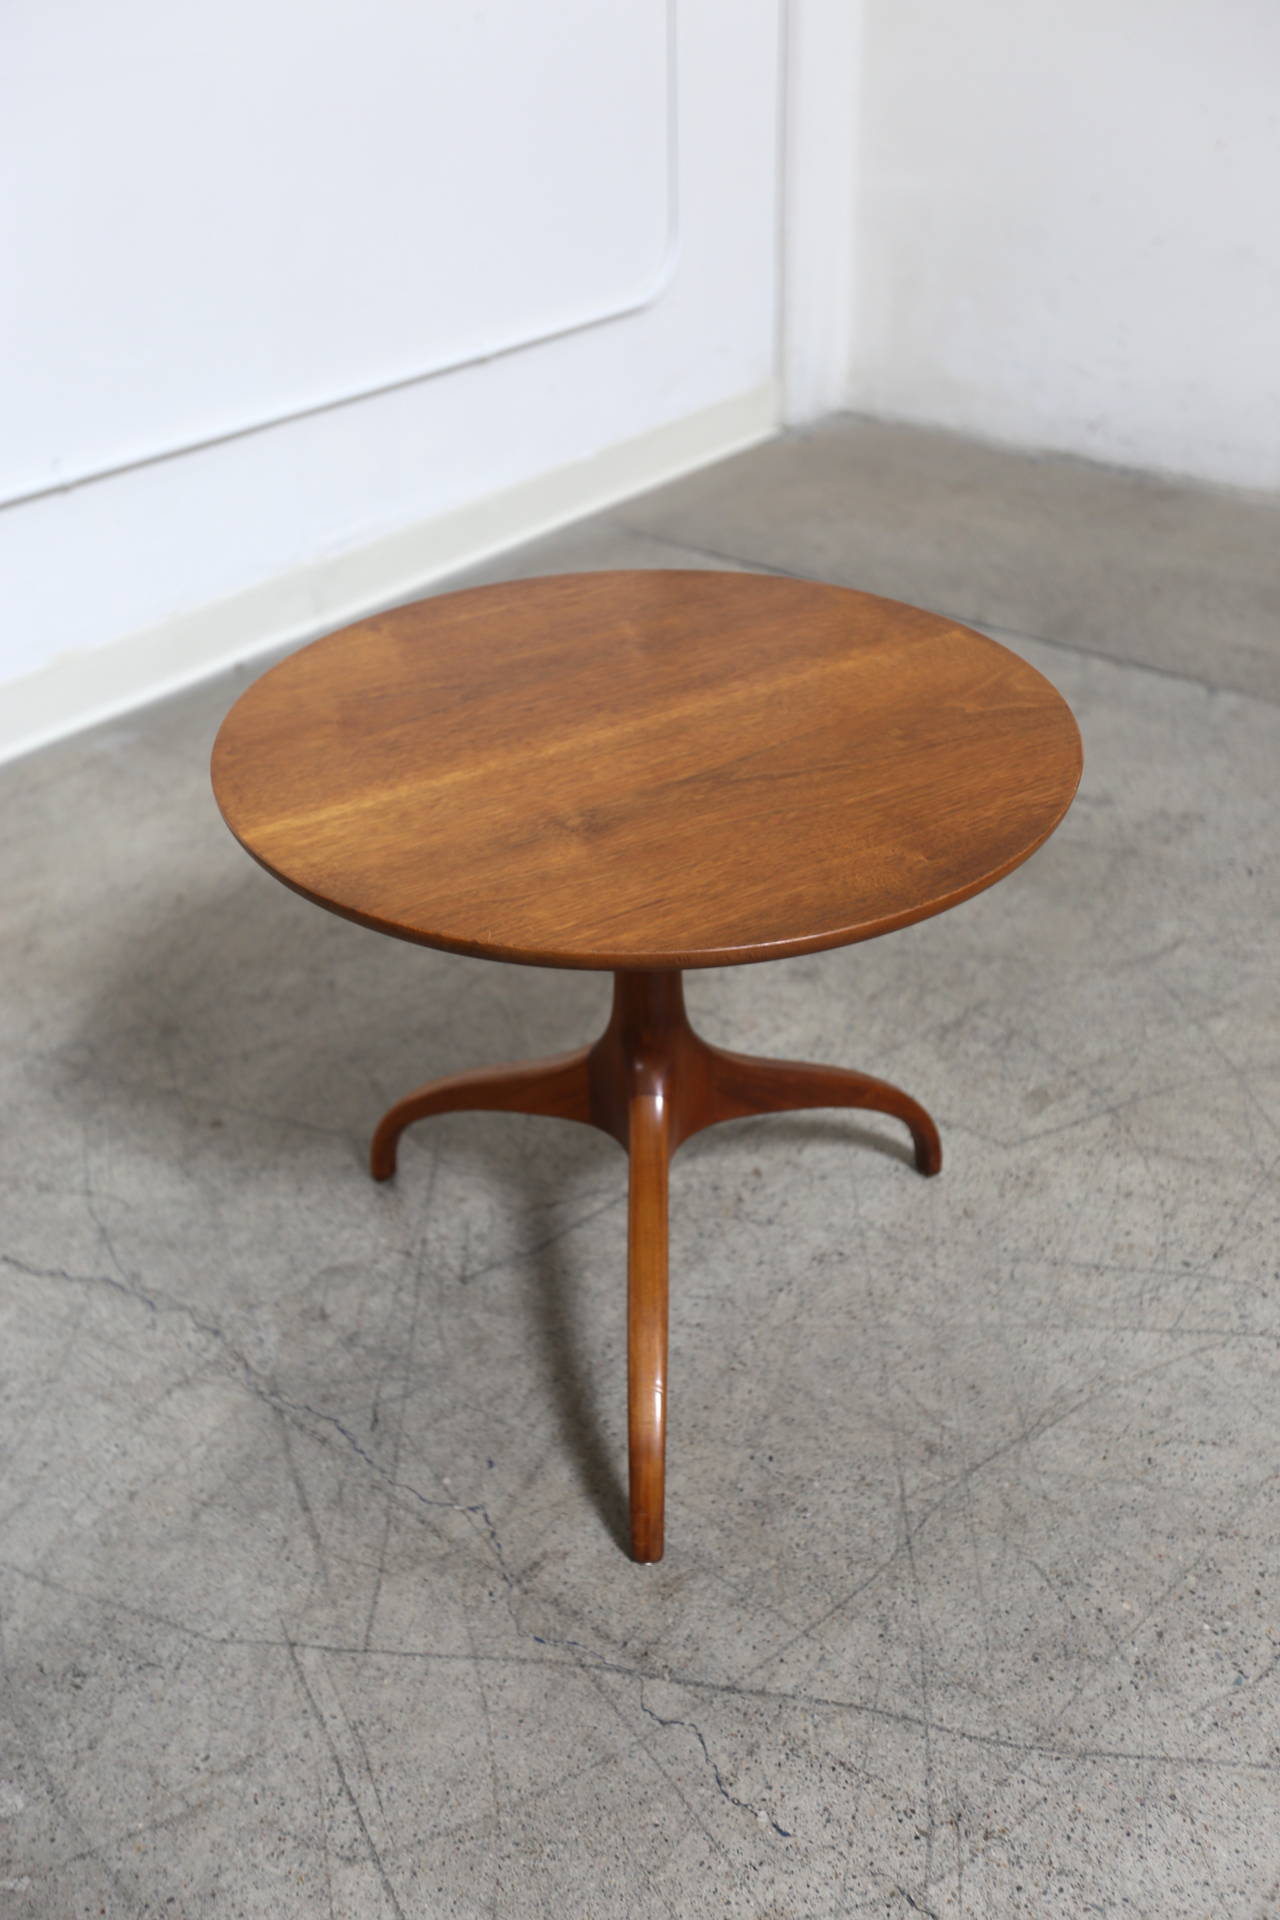 Sculptural side or occasional table by Henredon.